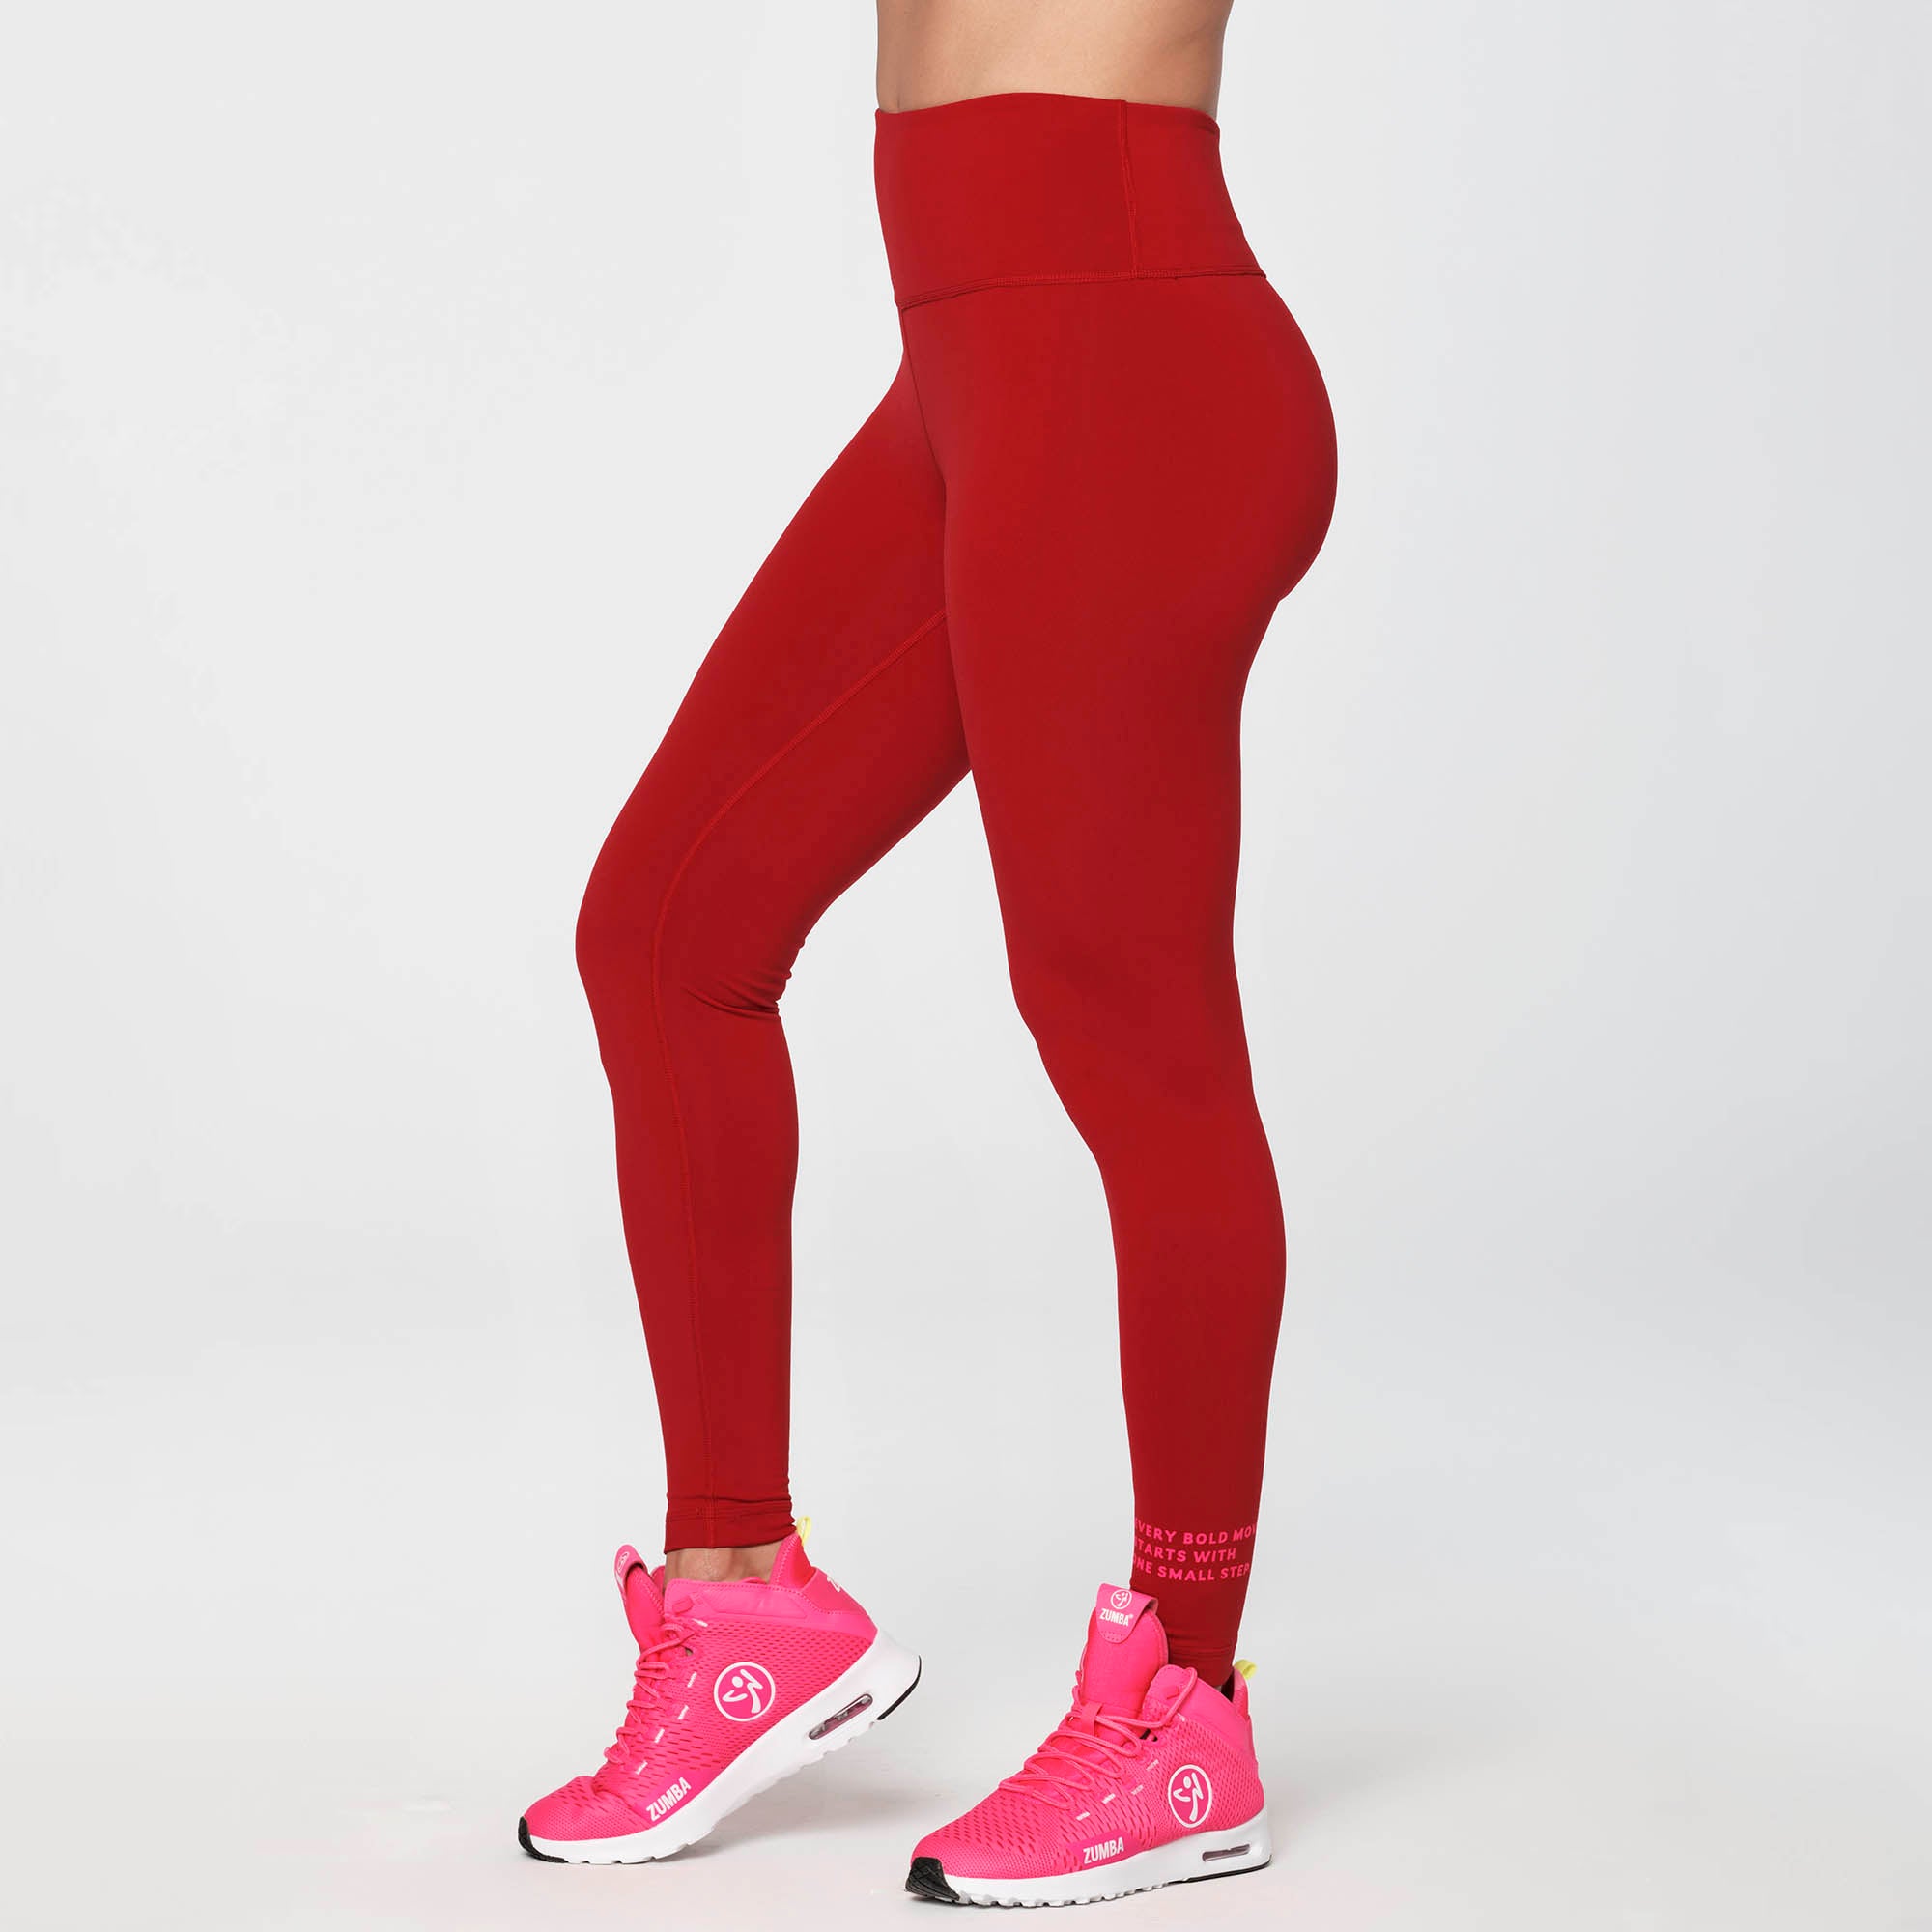 Zumba Happy Never Looked Better High Waisted Ankle Leggings 